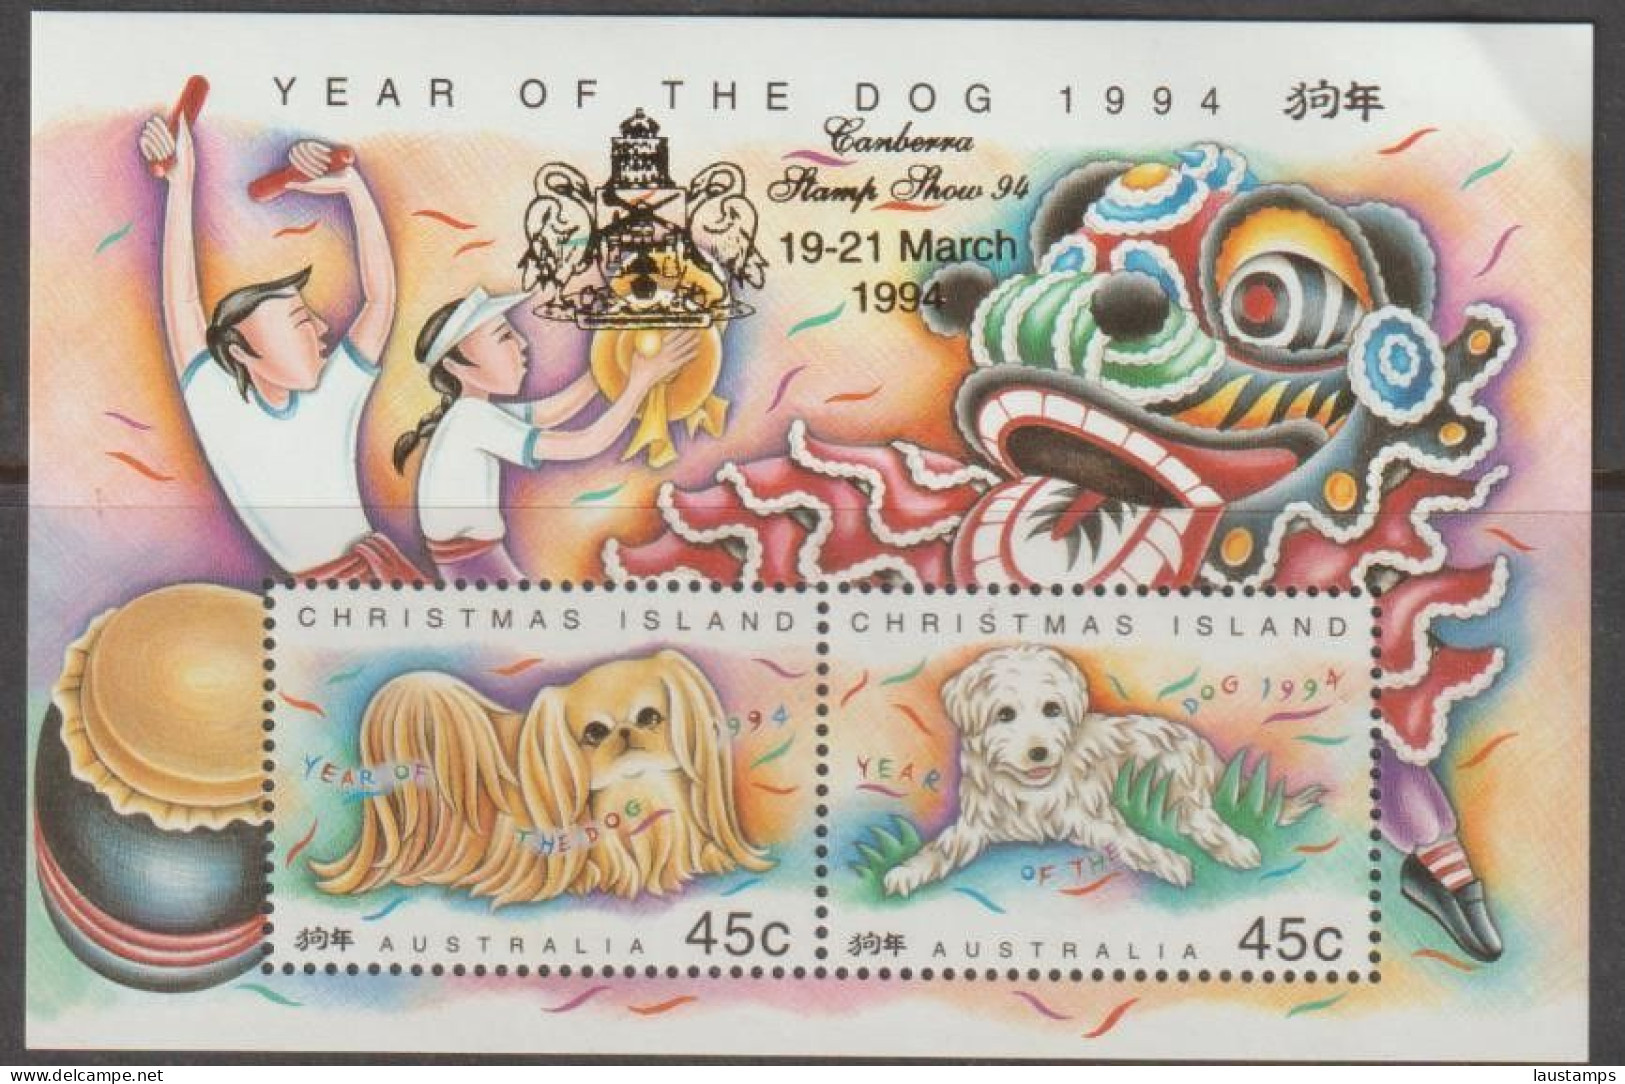 Christmas Island 1994 Year Of The Dog Ovpt Canberra Stamps Show S/S MNH - Chinese New Year